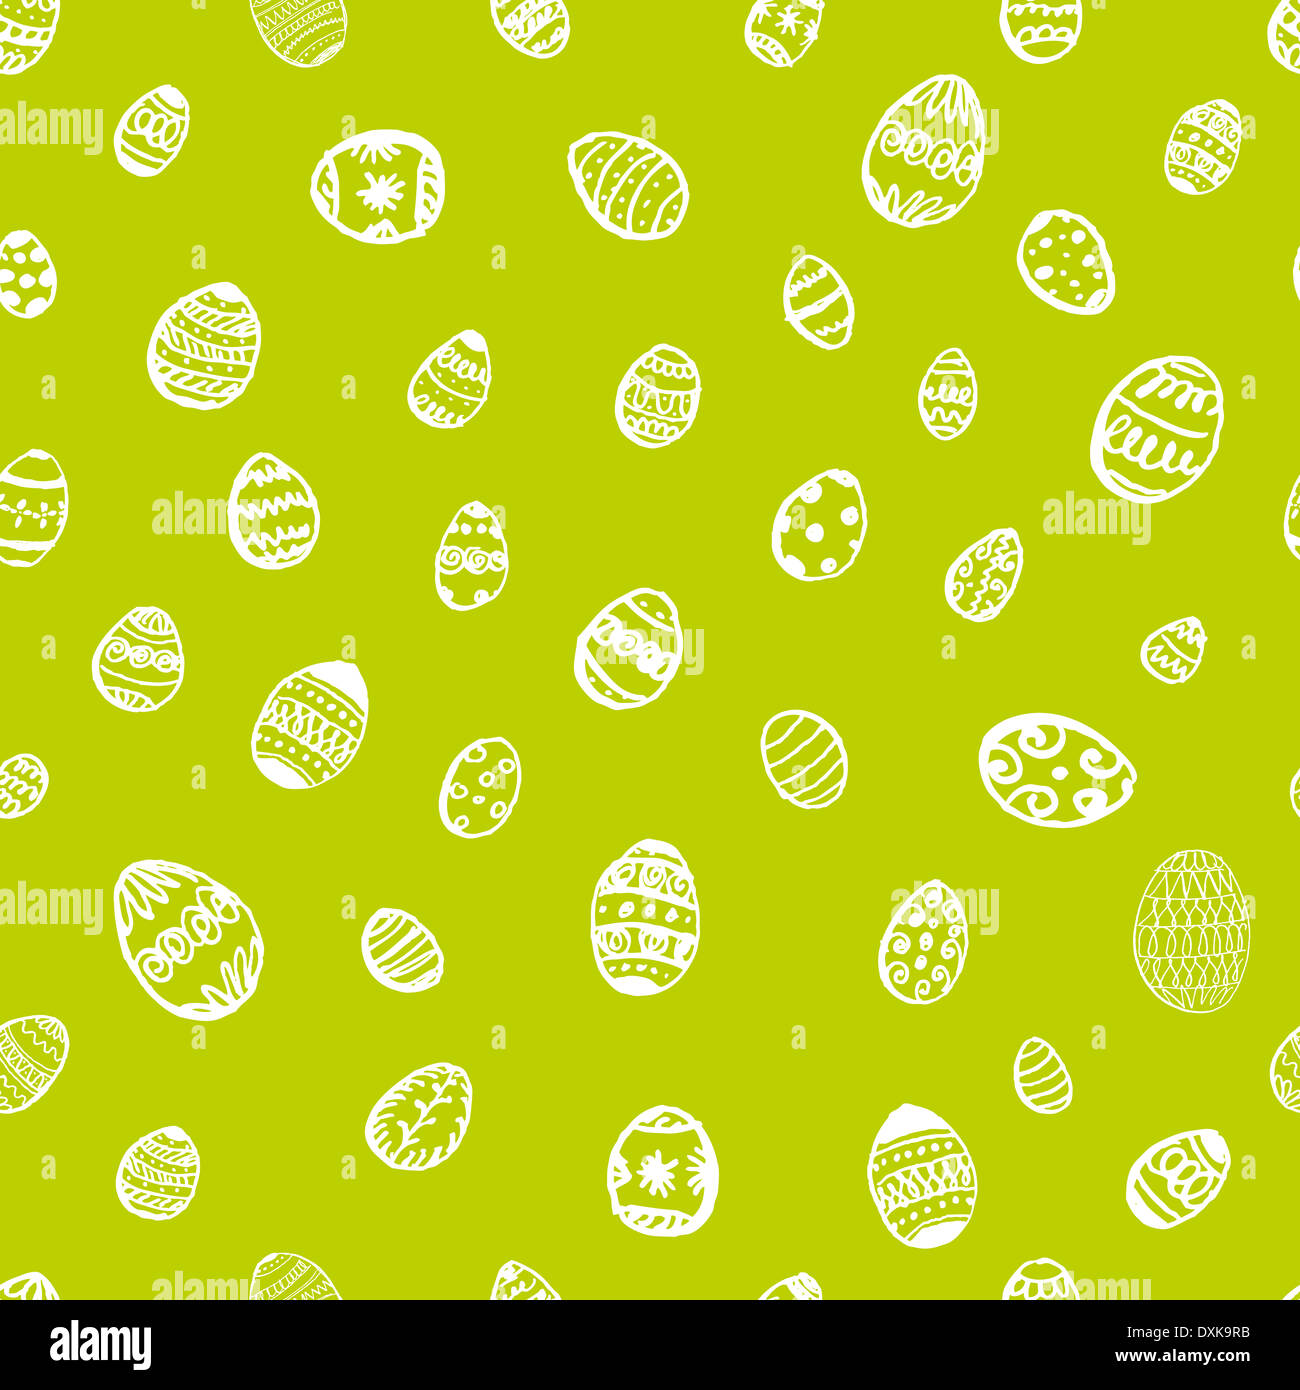 Ink hand-drawn doodle Easter Egg seamless pattern. Easter background. Stock Photo